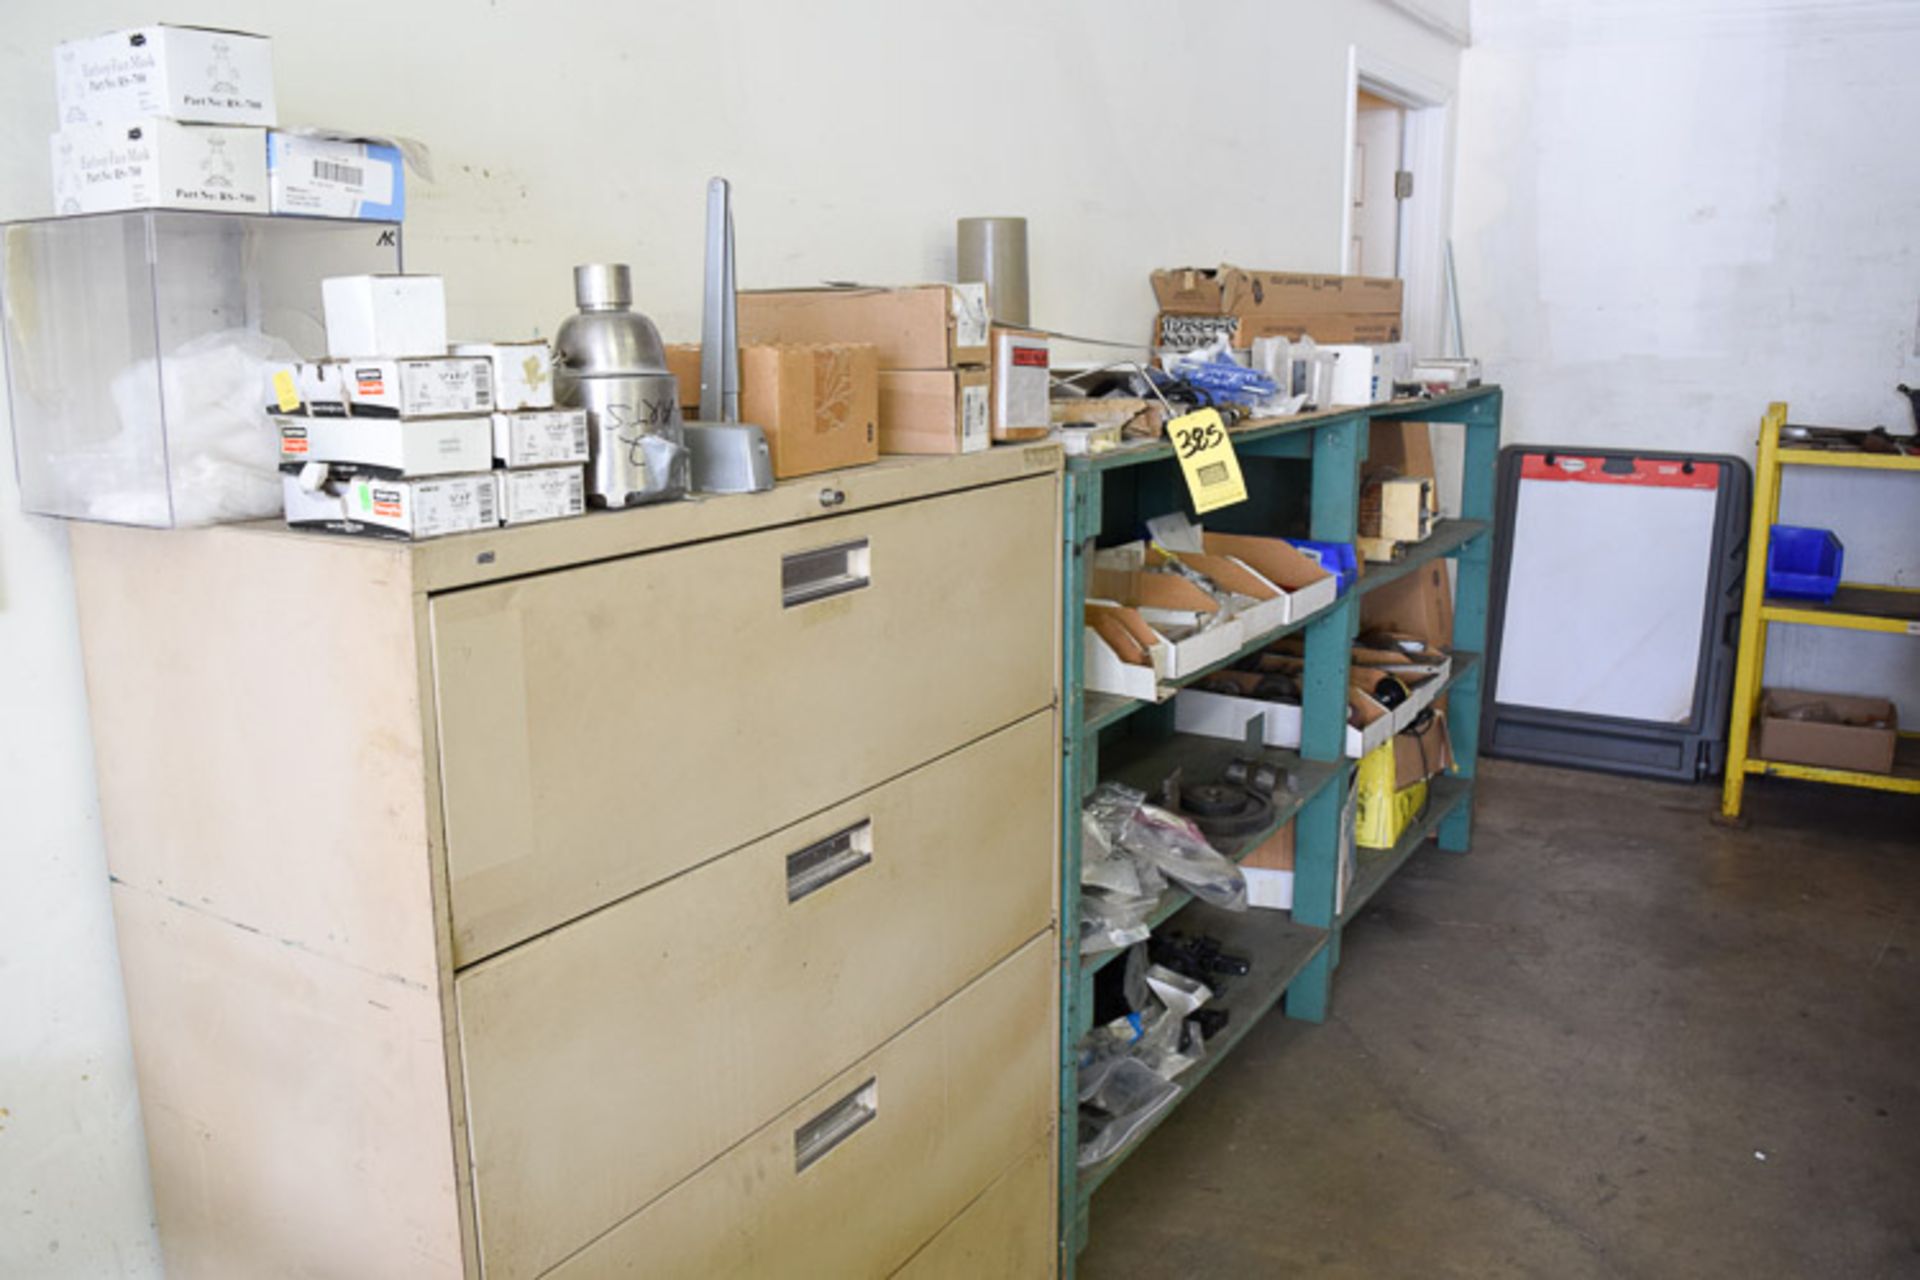 Grinding Wheels, Hardware Feed Pump, Etc. with Shelf and Lateral File Cabinet - Rigging Fee $ 300